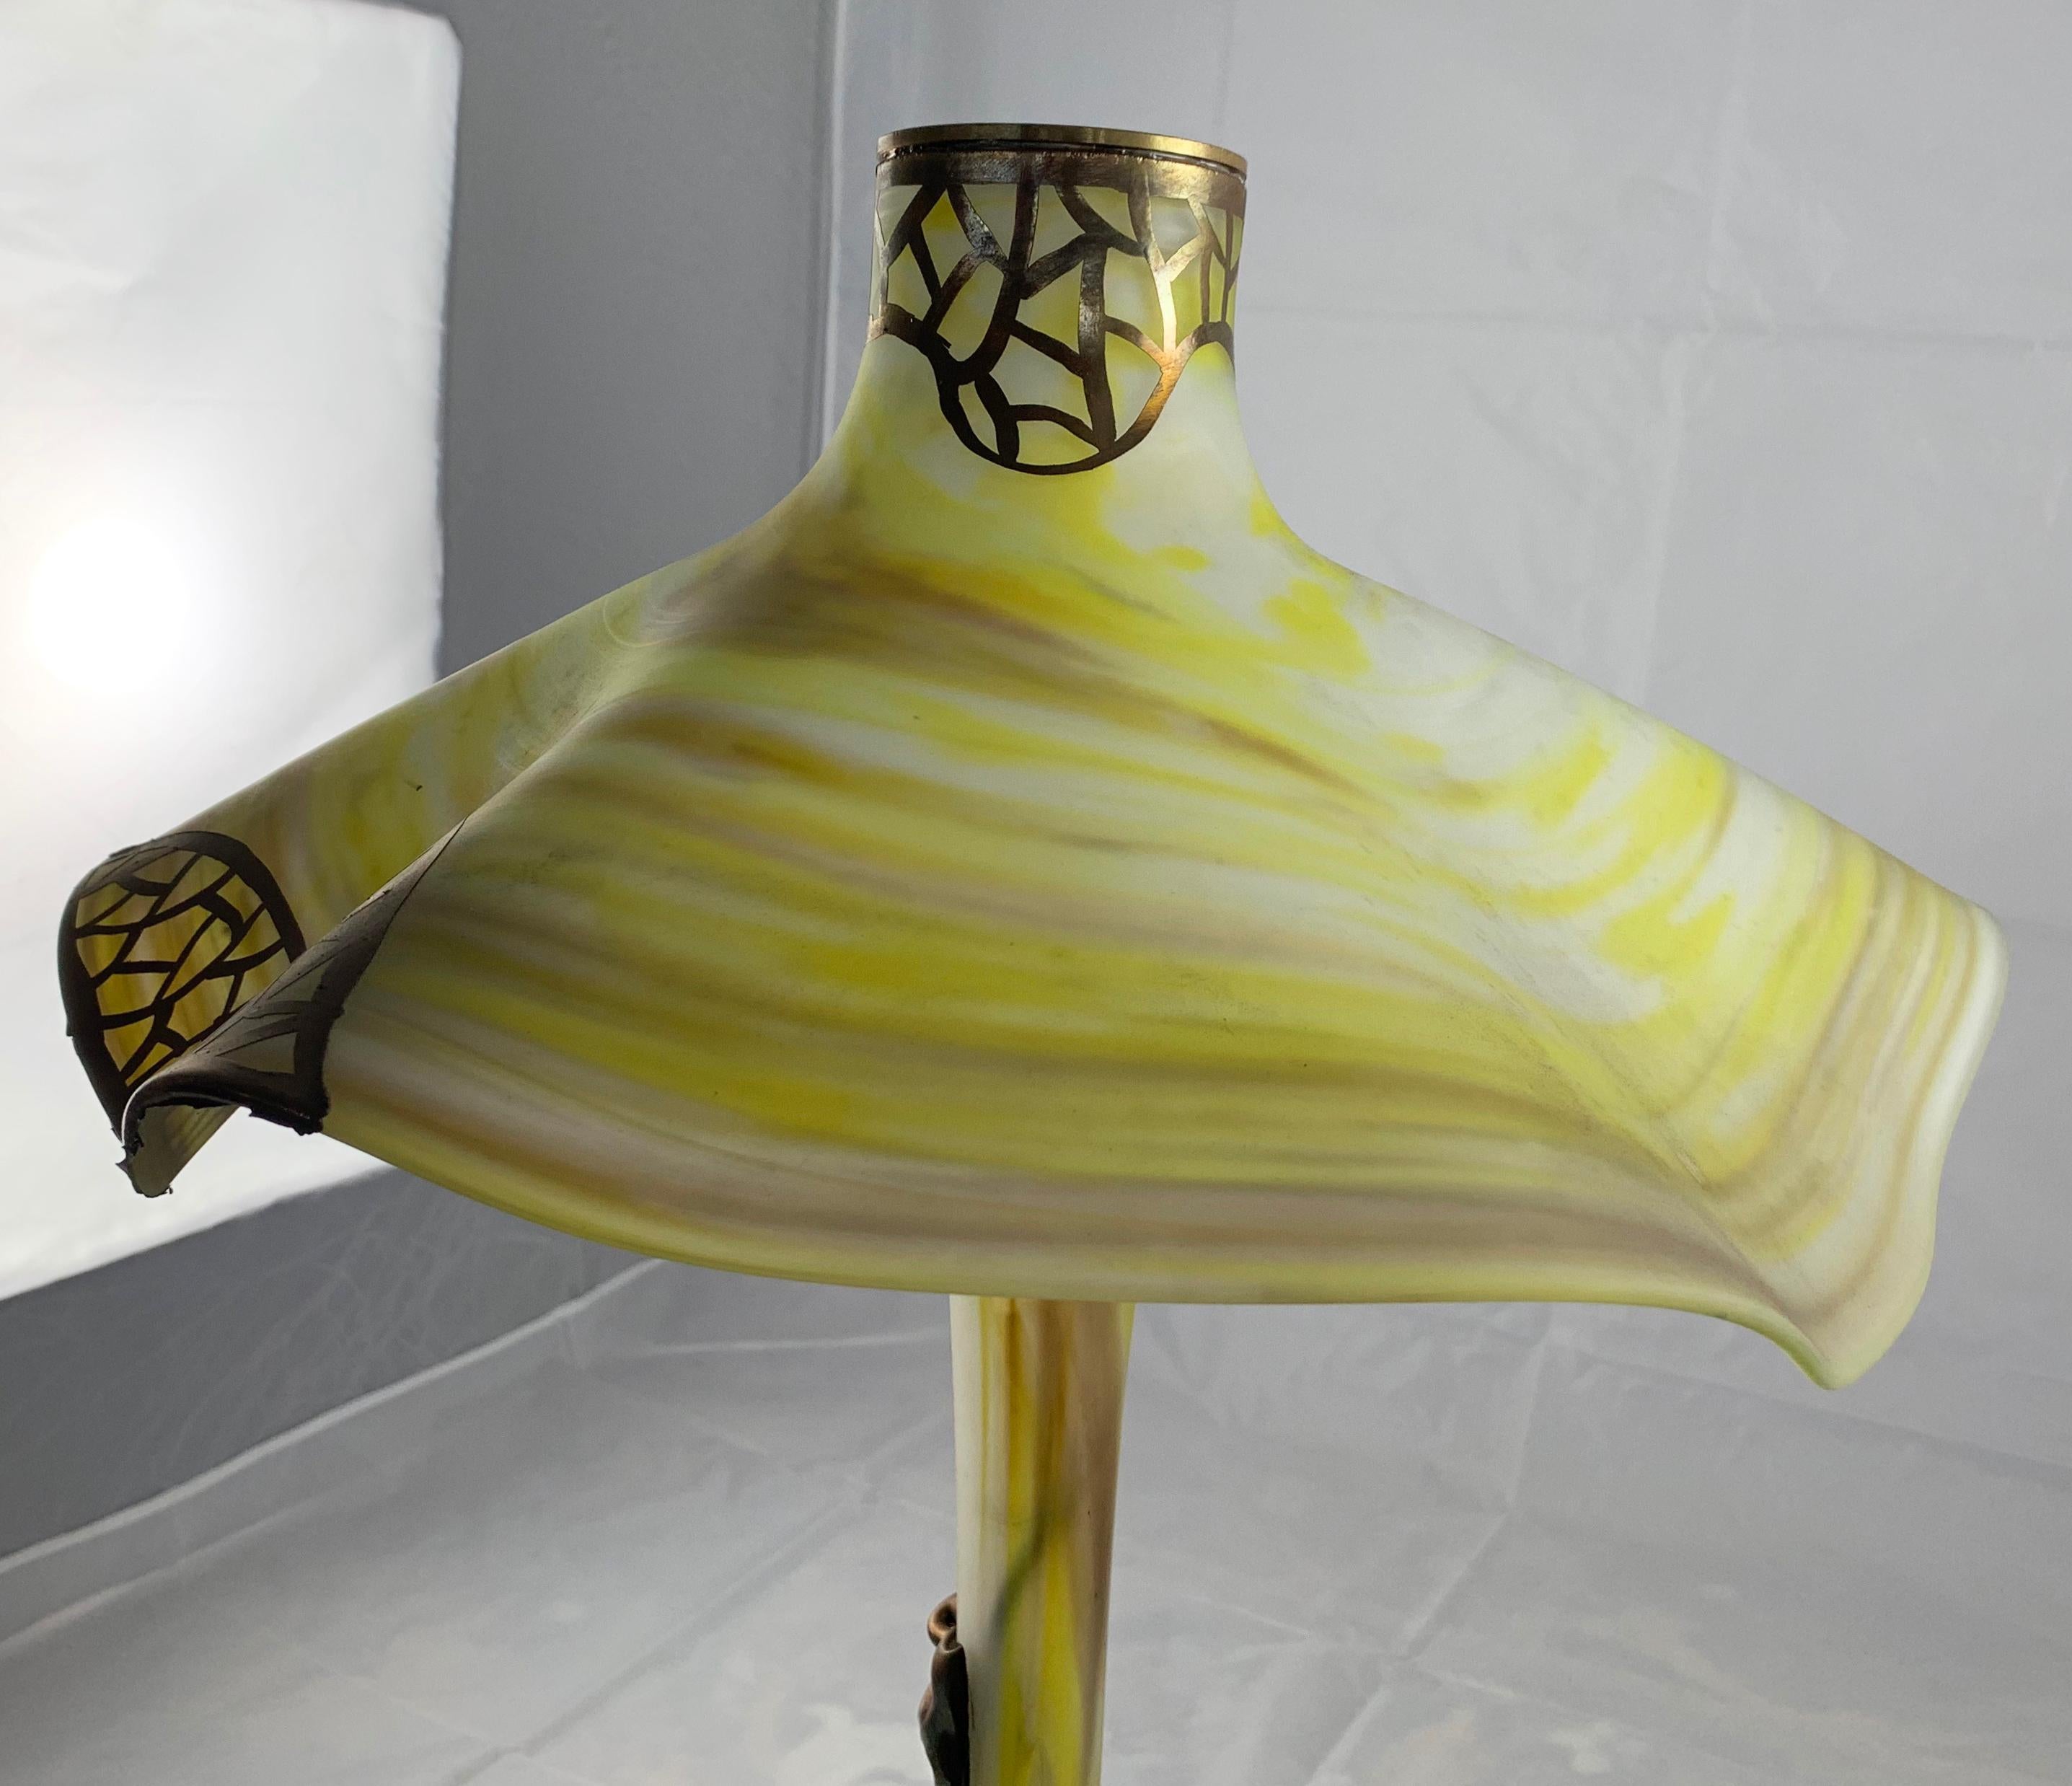 20th Century Unusual Art Glass Table Lamp in Art Nouveau Style For Sale 2